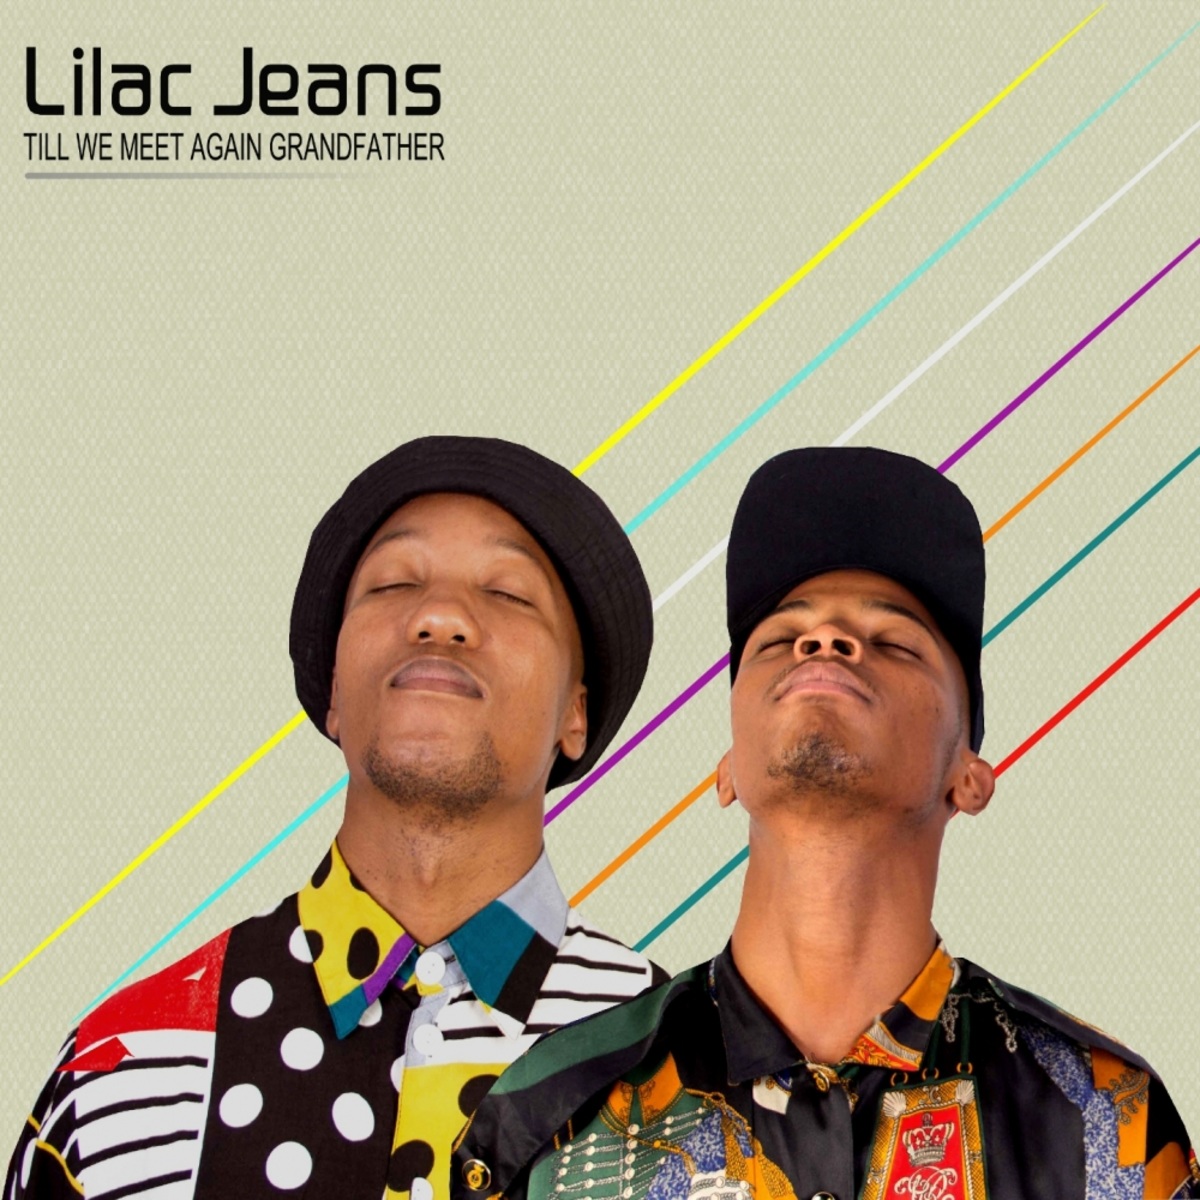 Lilac Jeans - Till We meet Again Grandfather / Lilac Jeans Records